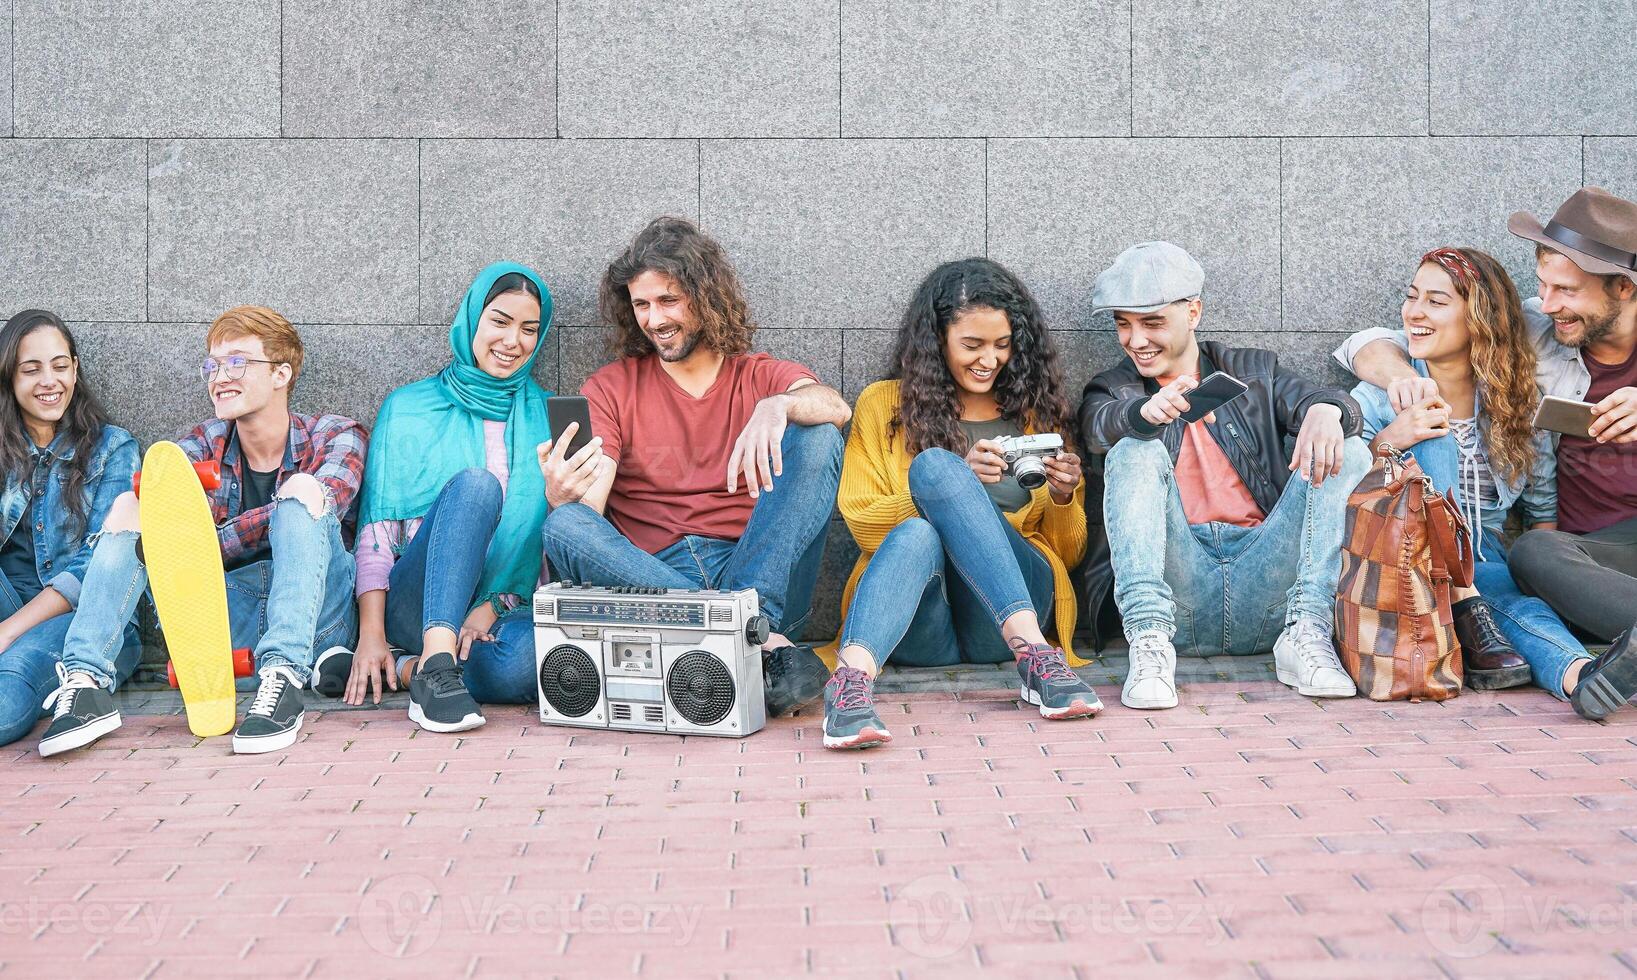 Group of diverse friends having fun outdoor - Millennial young people using mobile phones taking photo and listening music with vintage stereo - Generation z, social media and youth lifestyle concept